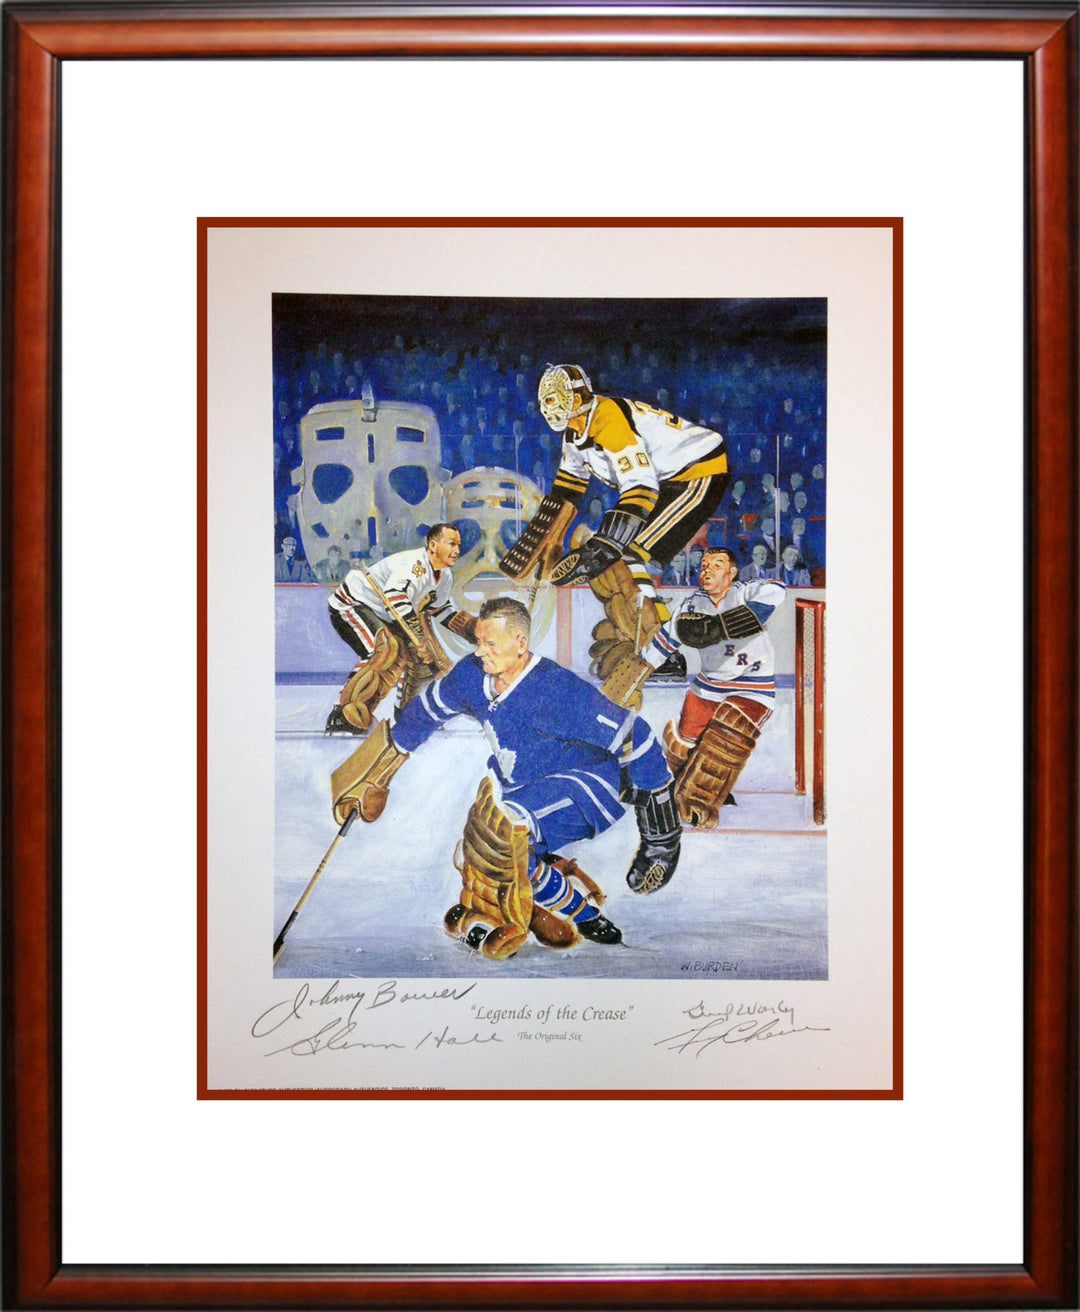 Legends Of The Crease Autographed Lithograph - Framed , Toronto Maple Leafs, New York Rangers, NHL, Hockey, Autographed, Signed, AACMH30226